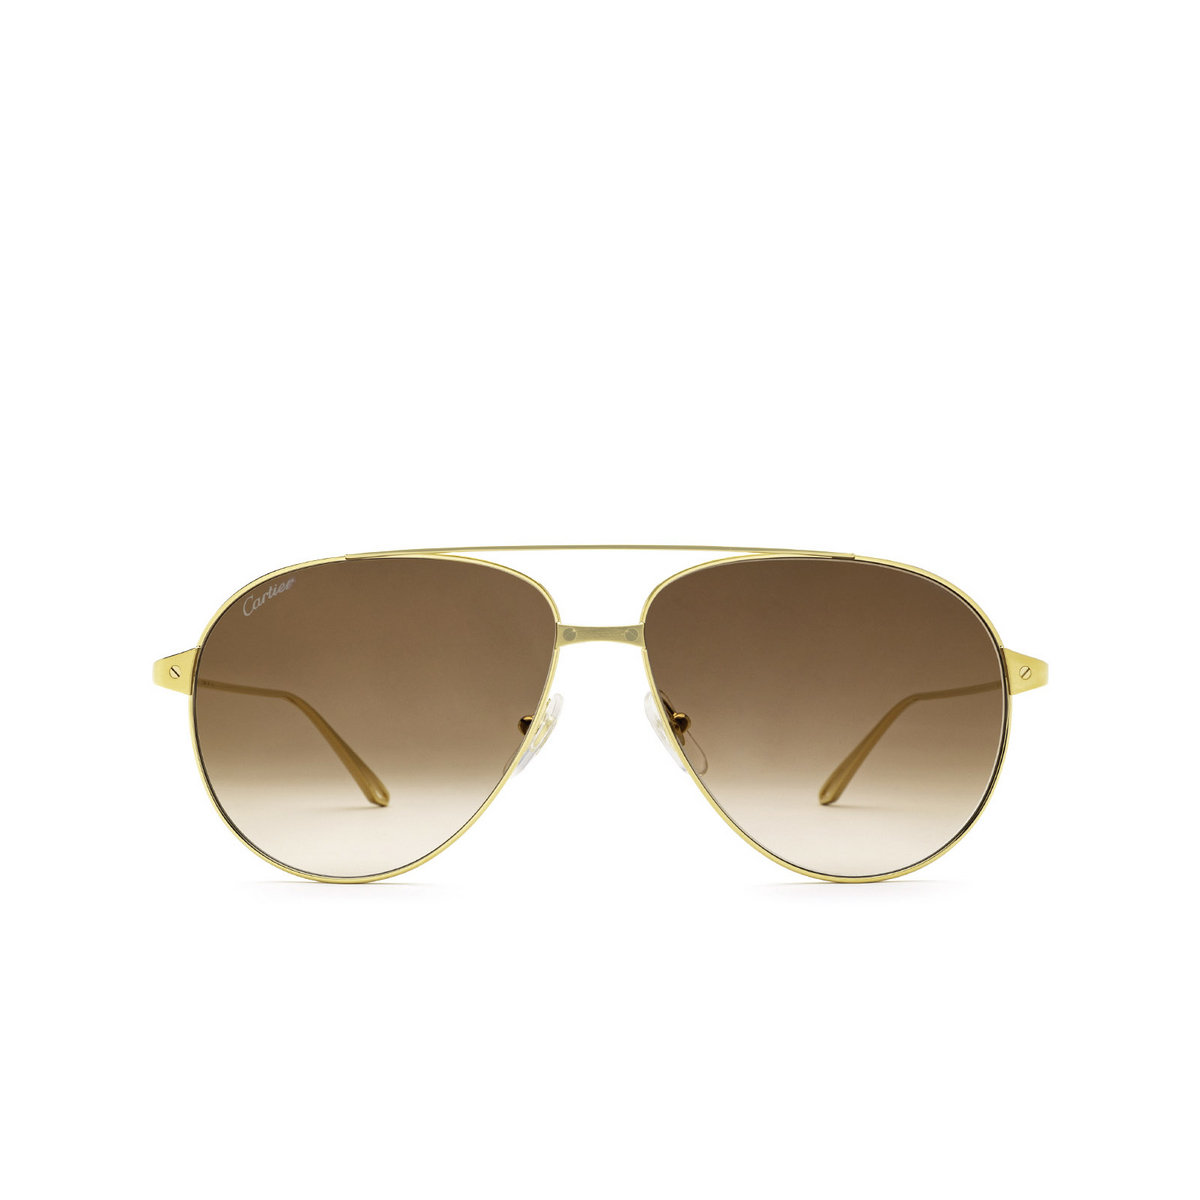 Cartier® Aviator Sunglasses: CT0298S color Gold 007 - front view.